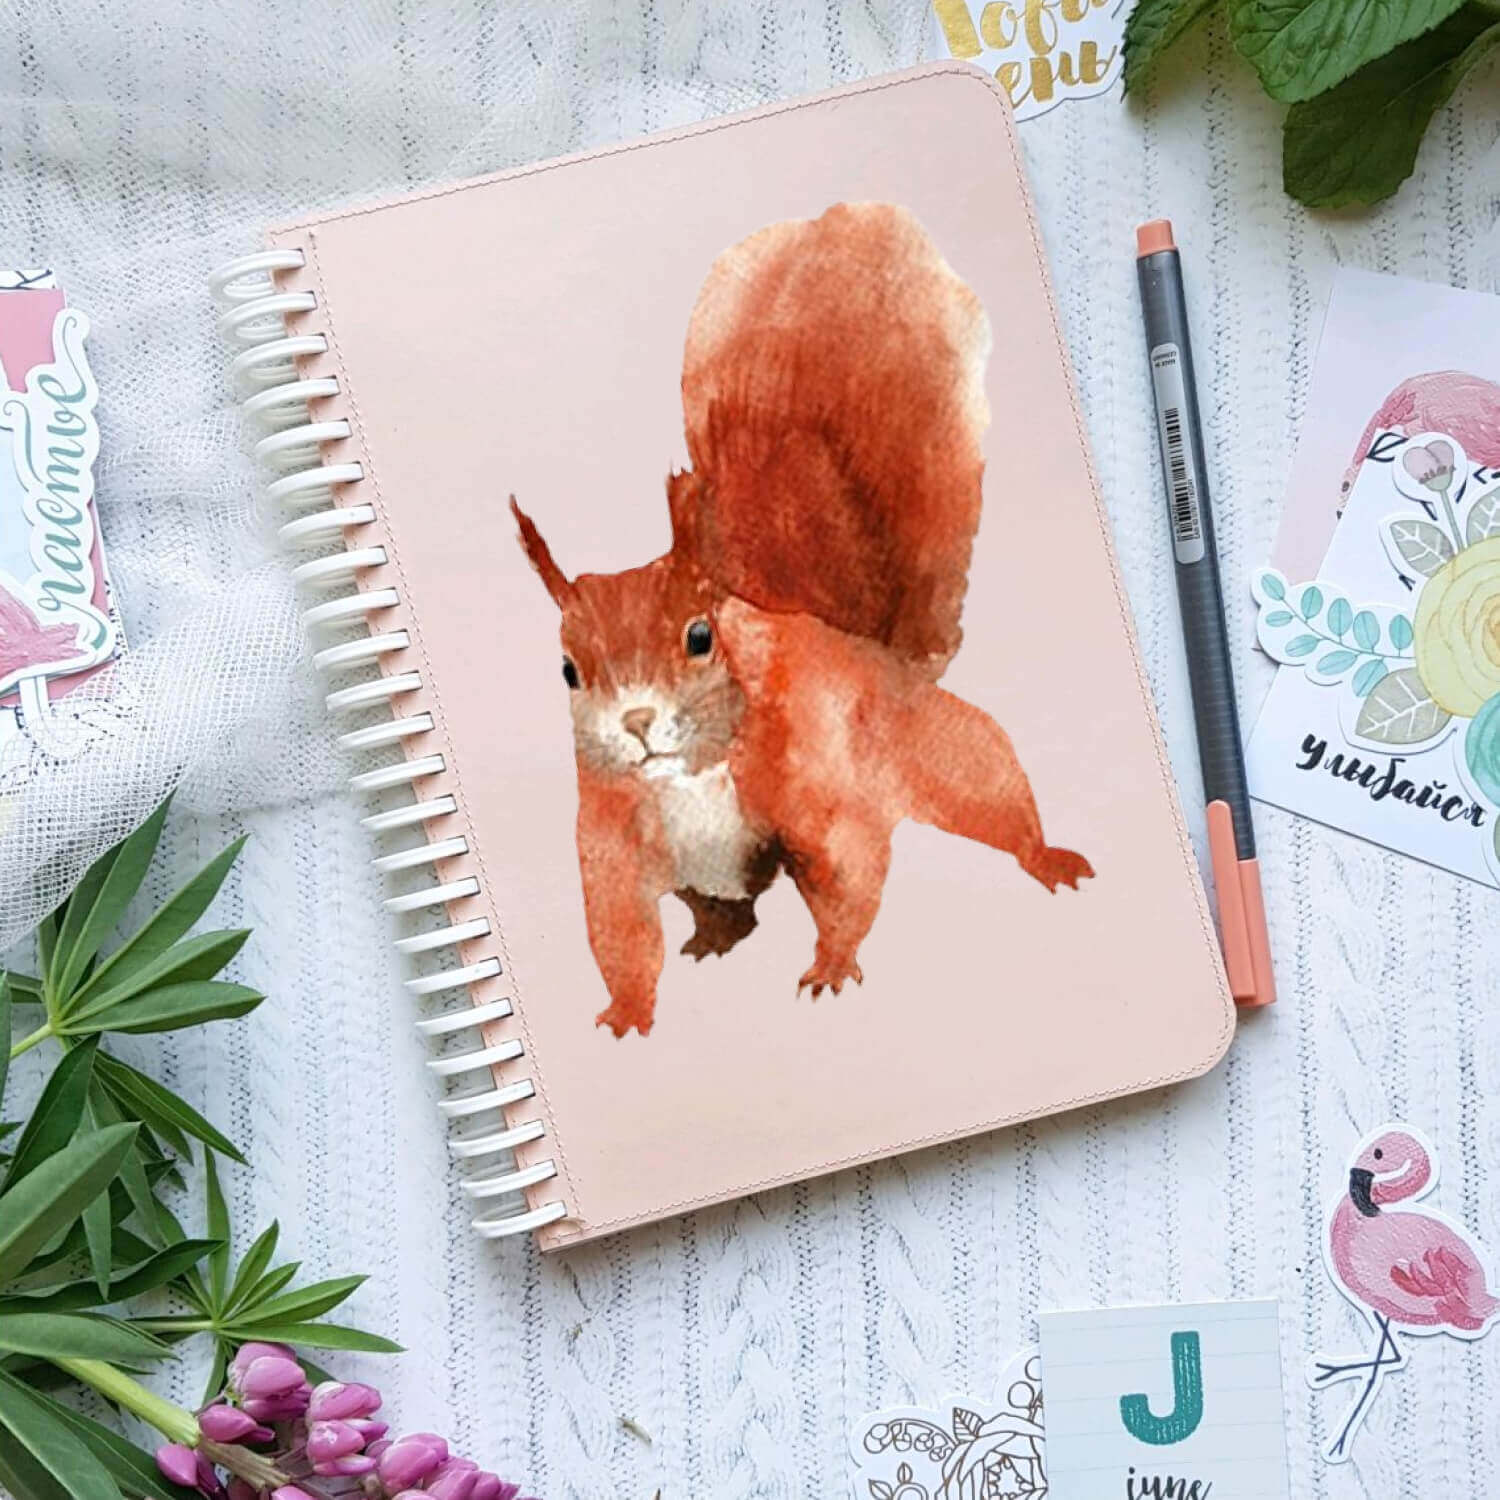 Image of a squirrel painted in watercolor on a notebook.